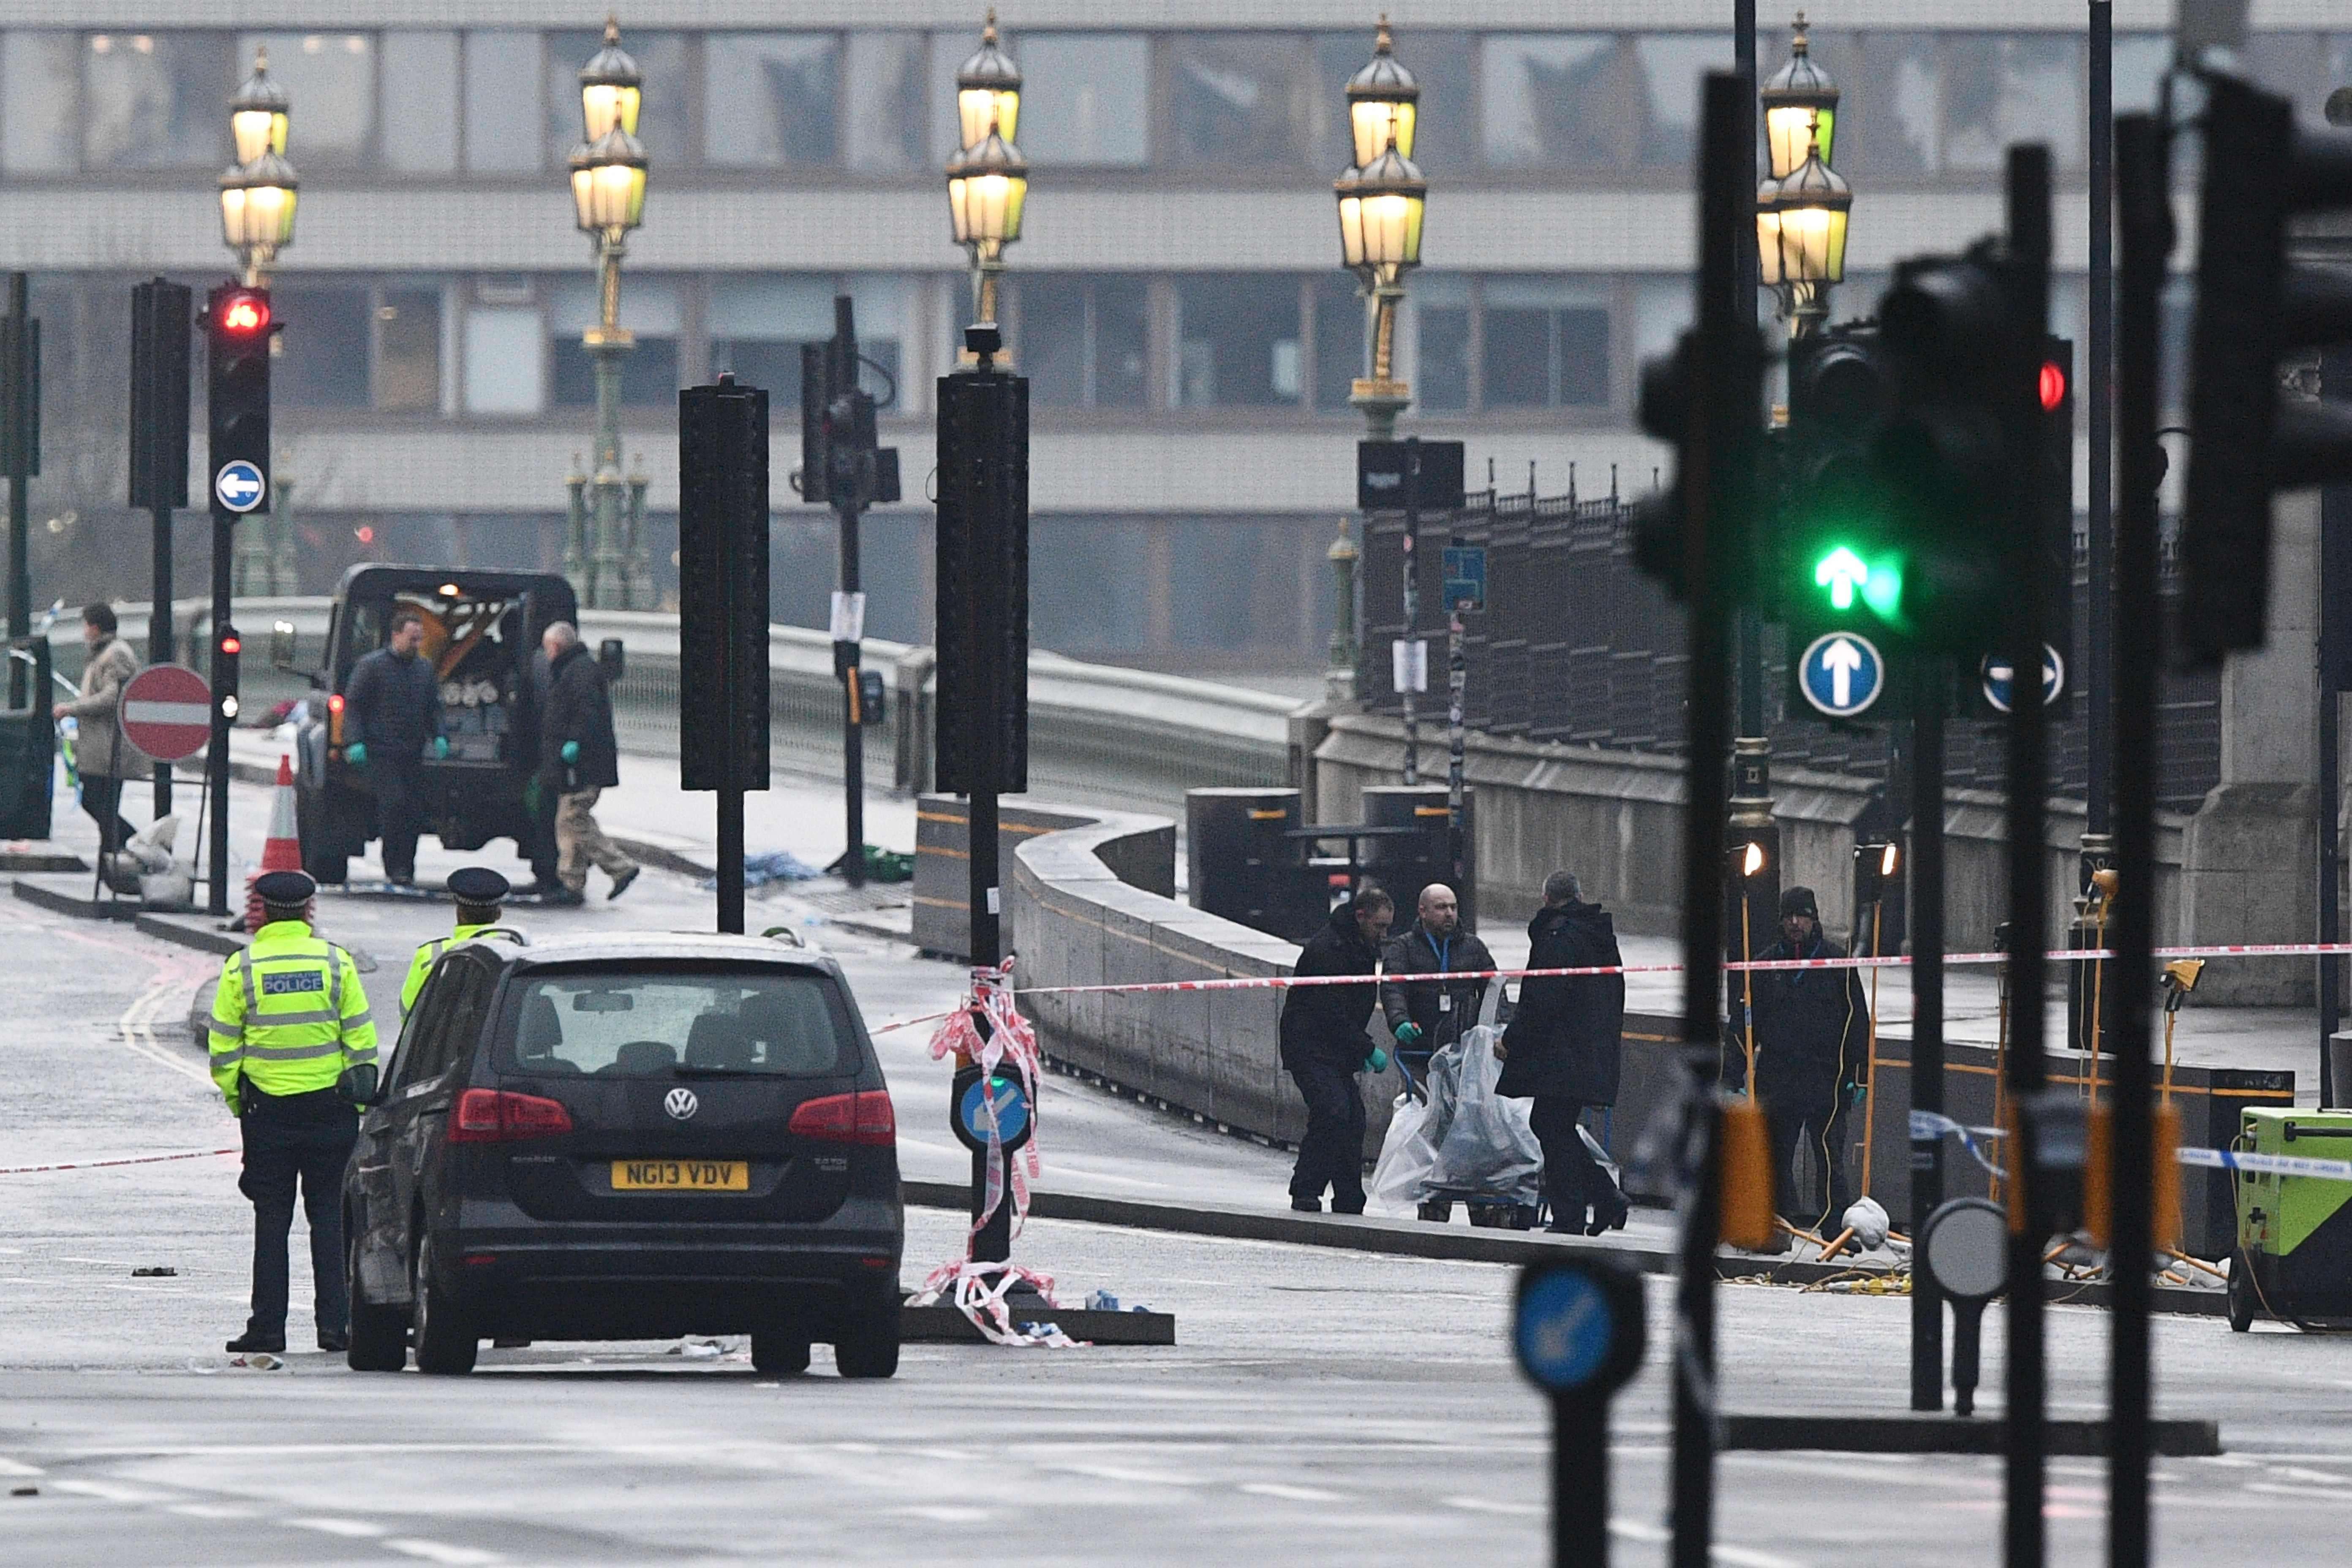 Security services staff collect debris left following the terror attack on Westminster Bridge. Photo: AFP